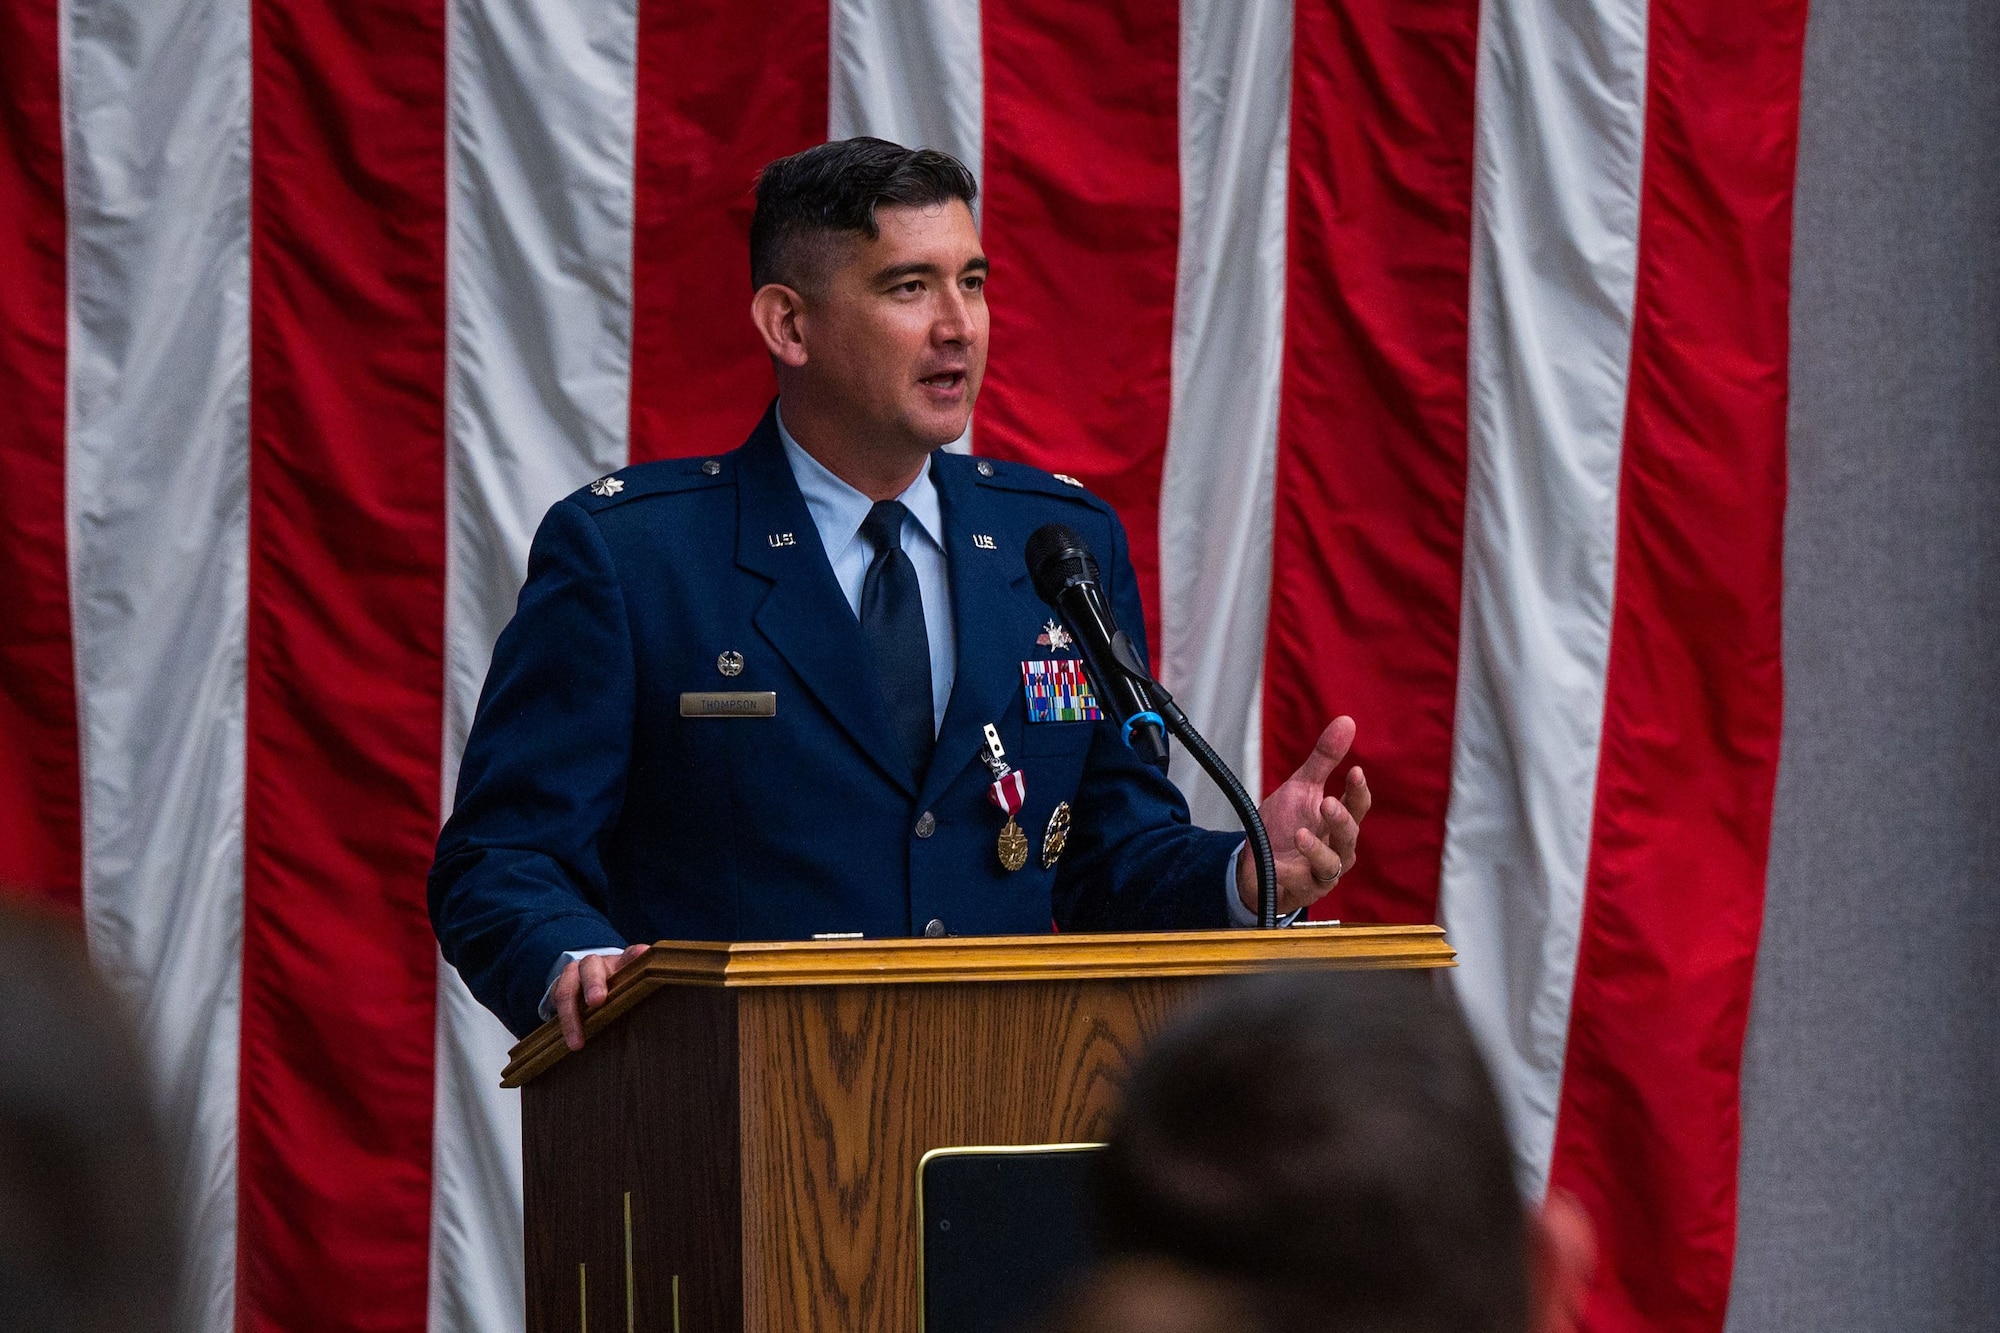 U.S. Space Force Lt. Col. Jason Thompson, outgoing 65th Cyberspace Squadron (65 CYS) commander, gives his final remarks as commander during the 65 CYS change of command ceremony at Vandenberg Space Force Base, Calif., July 21, 2023. (U.S. Space Force photo by Tech. Sgt. Luke Kitterman)